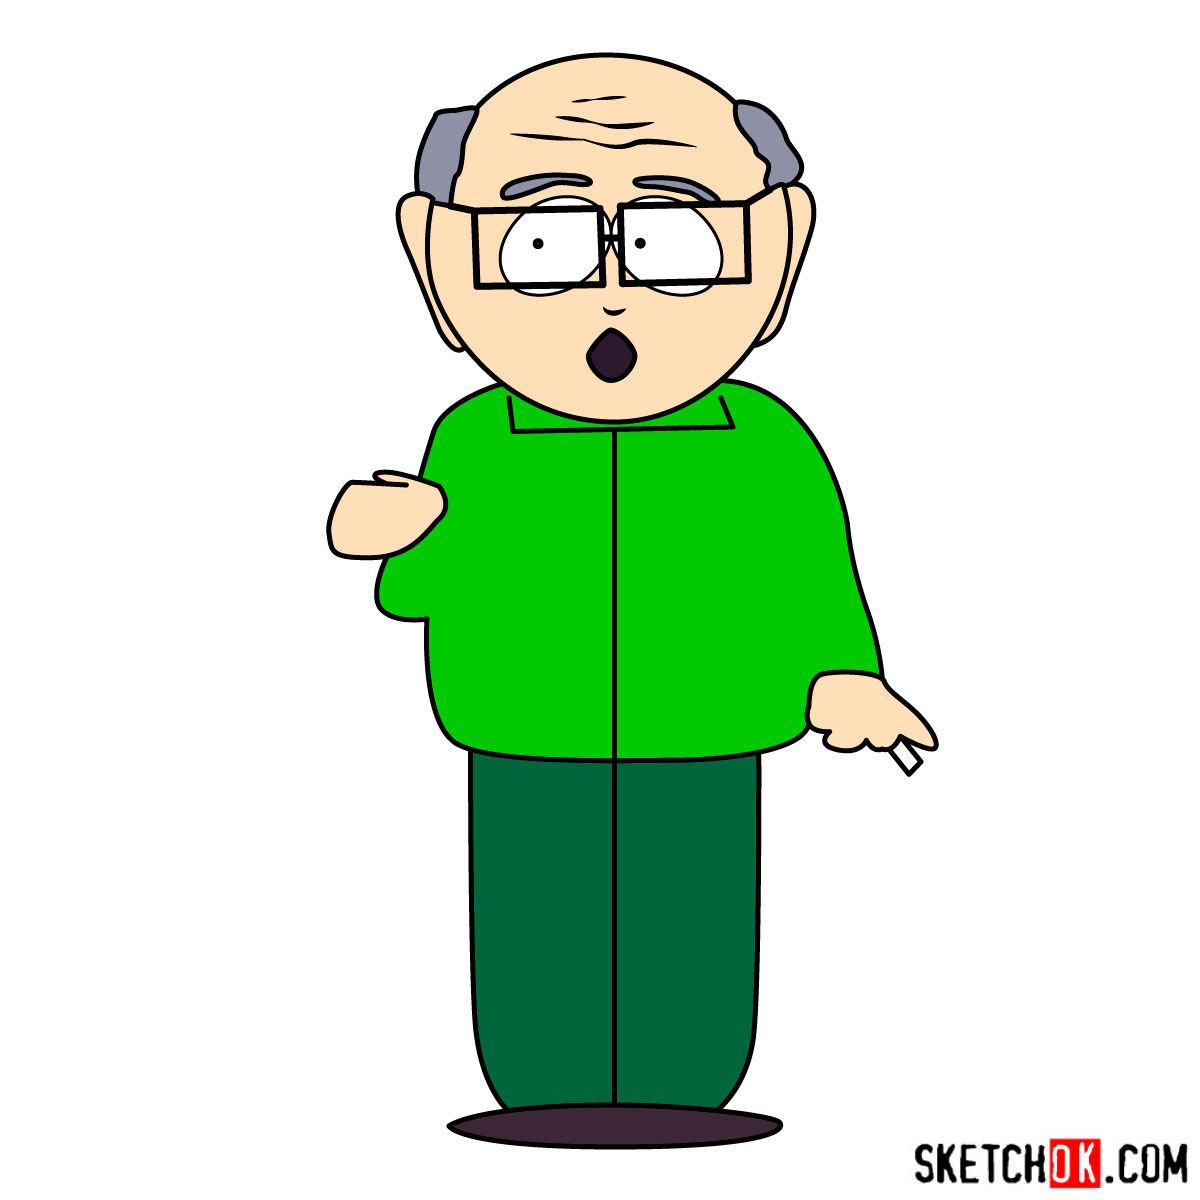 How to draw Herbert Garrison from South Park